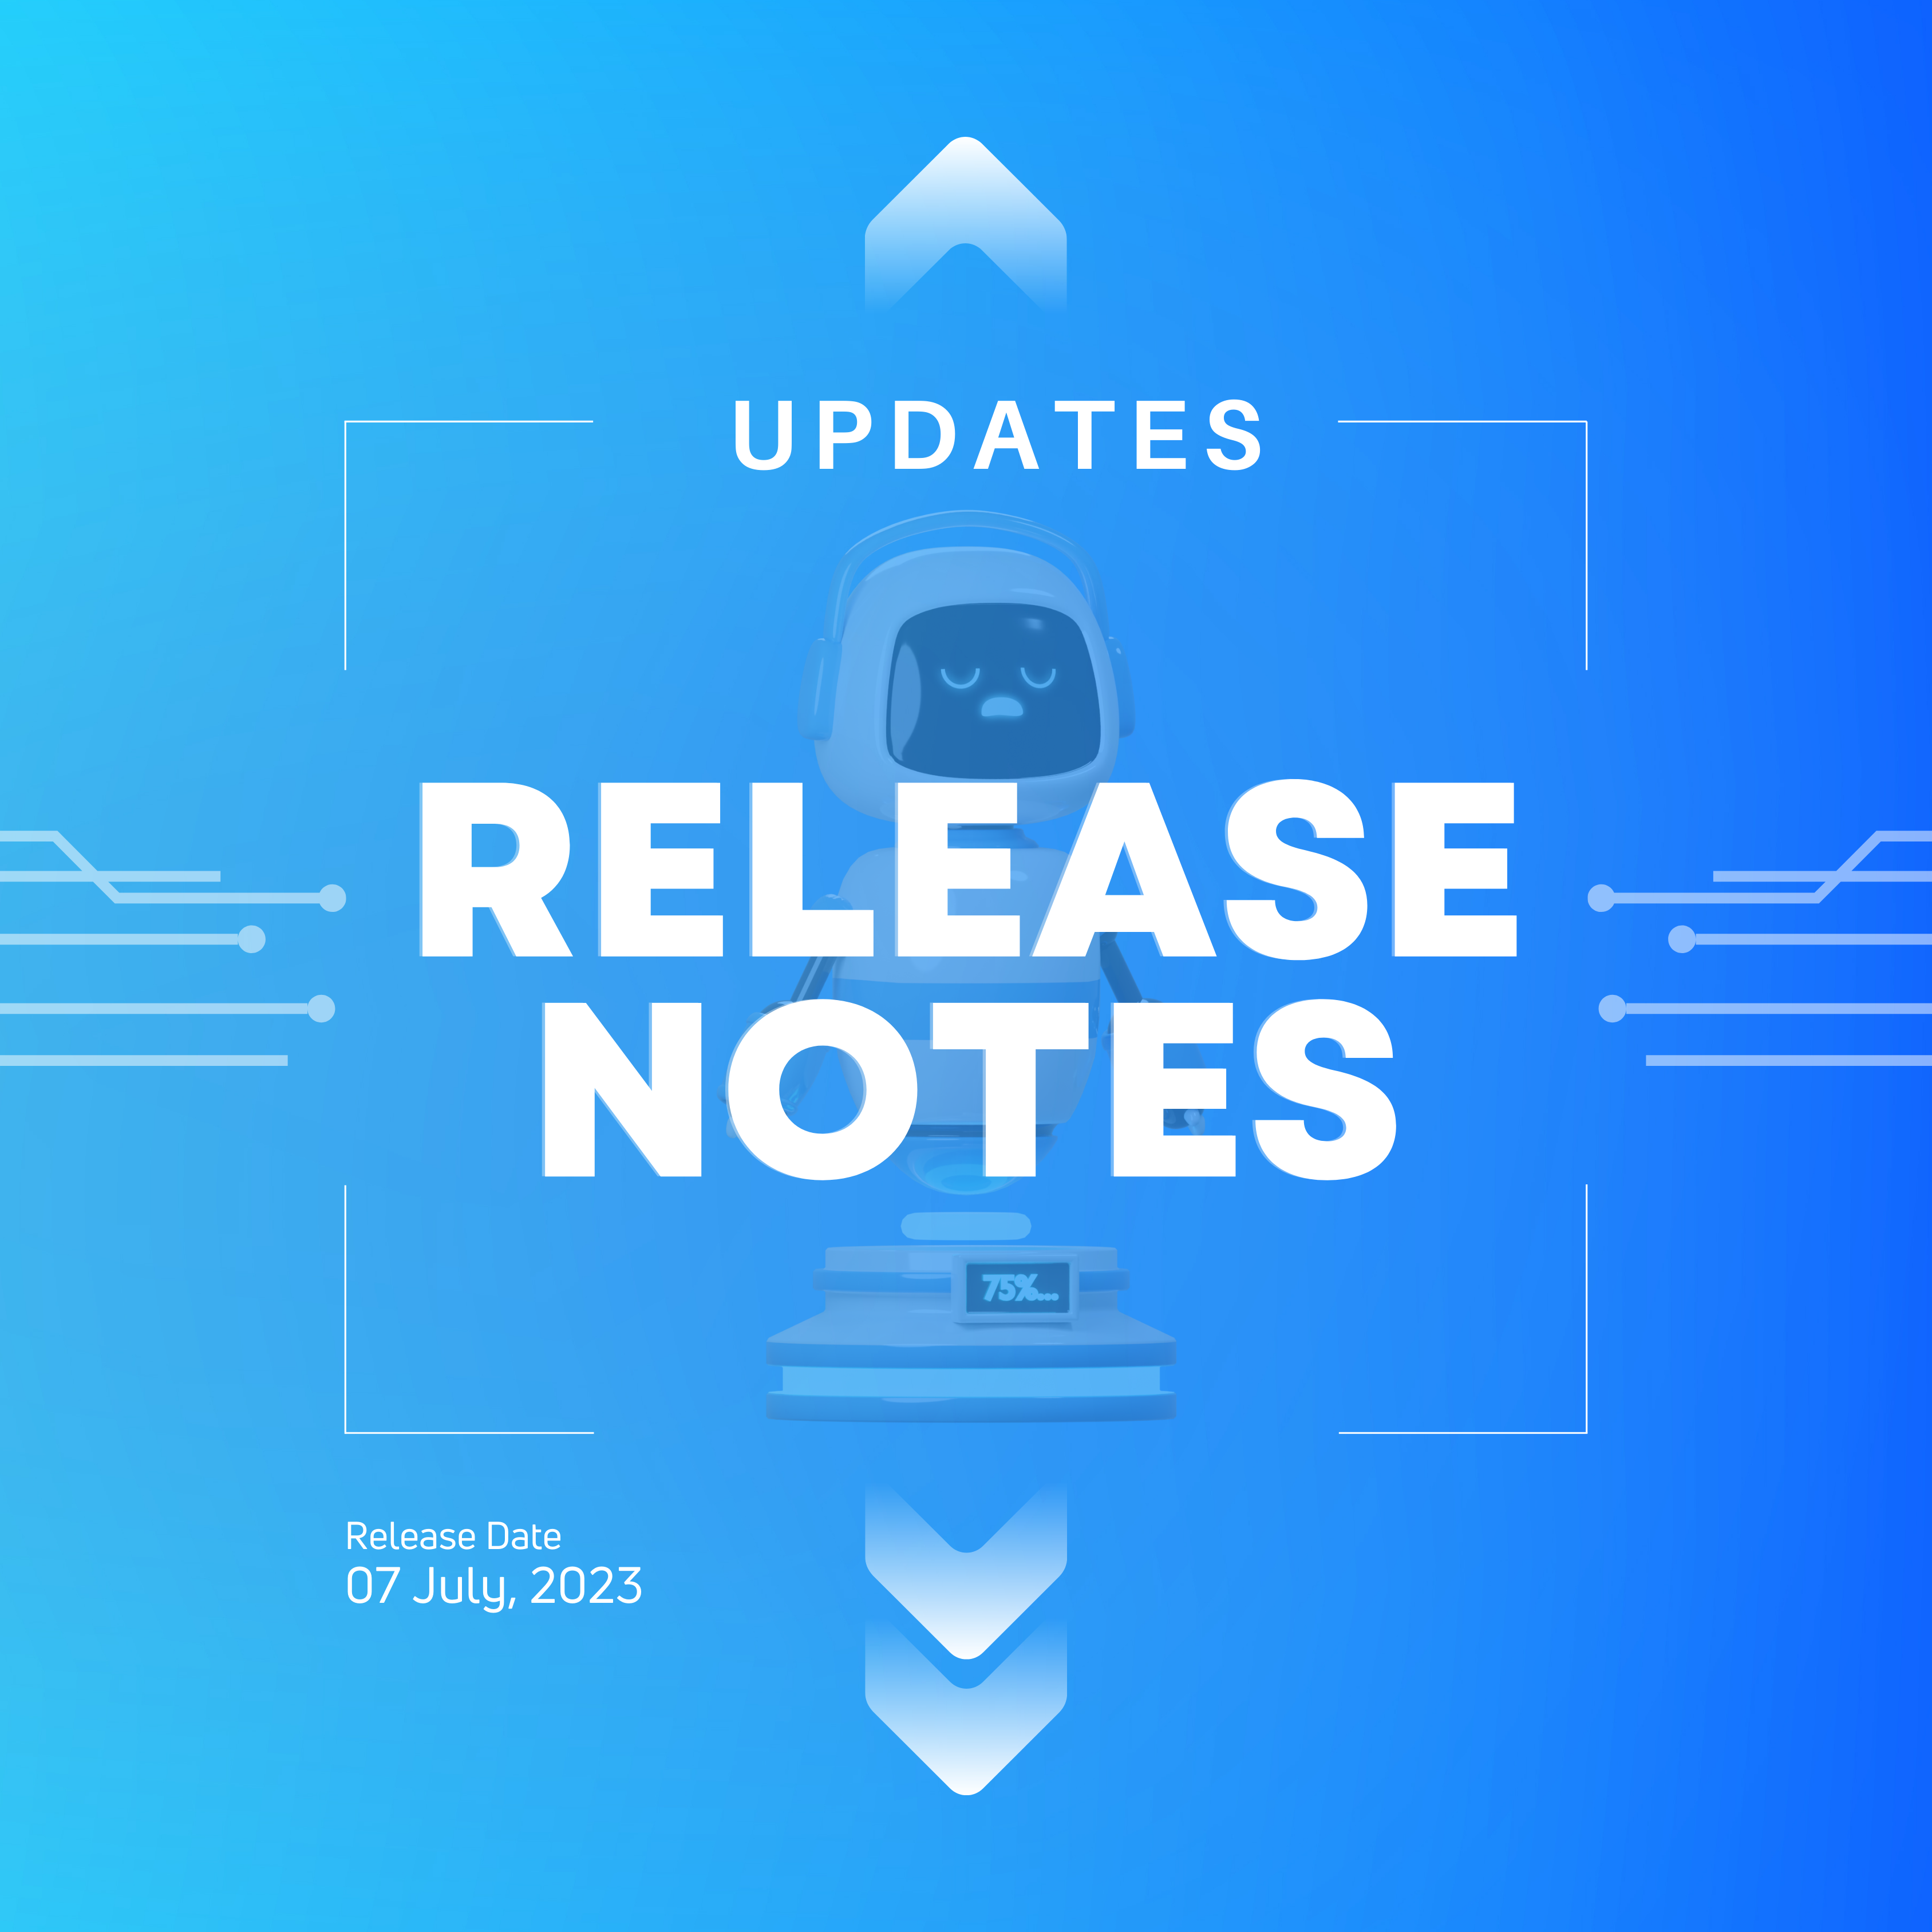  Release notes for seonc quarter of 2023 